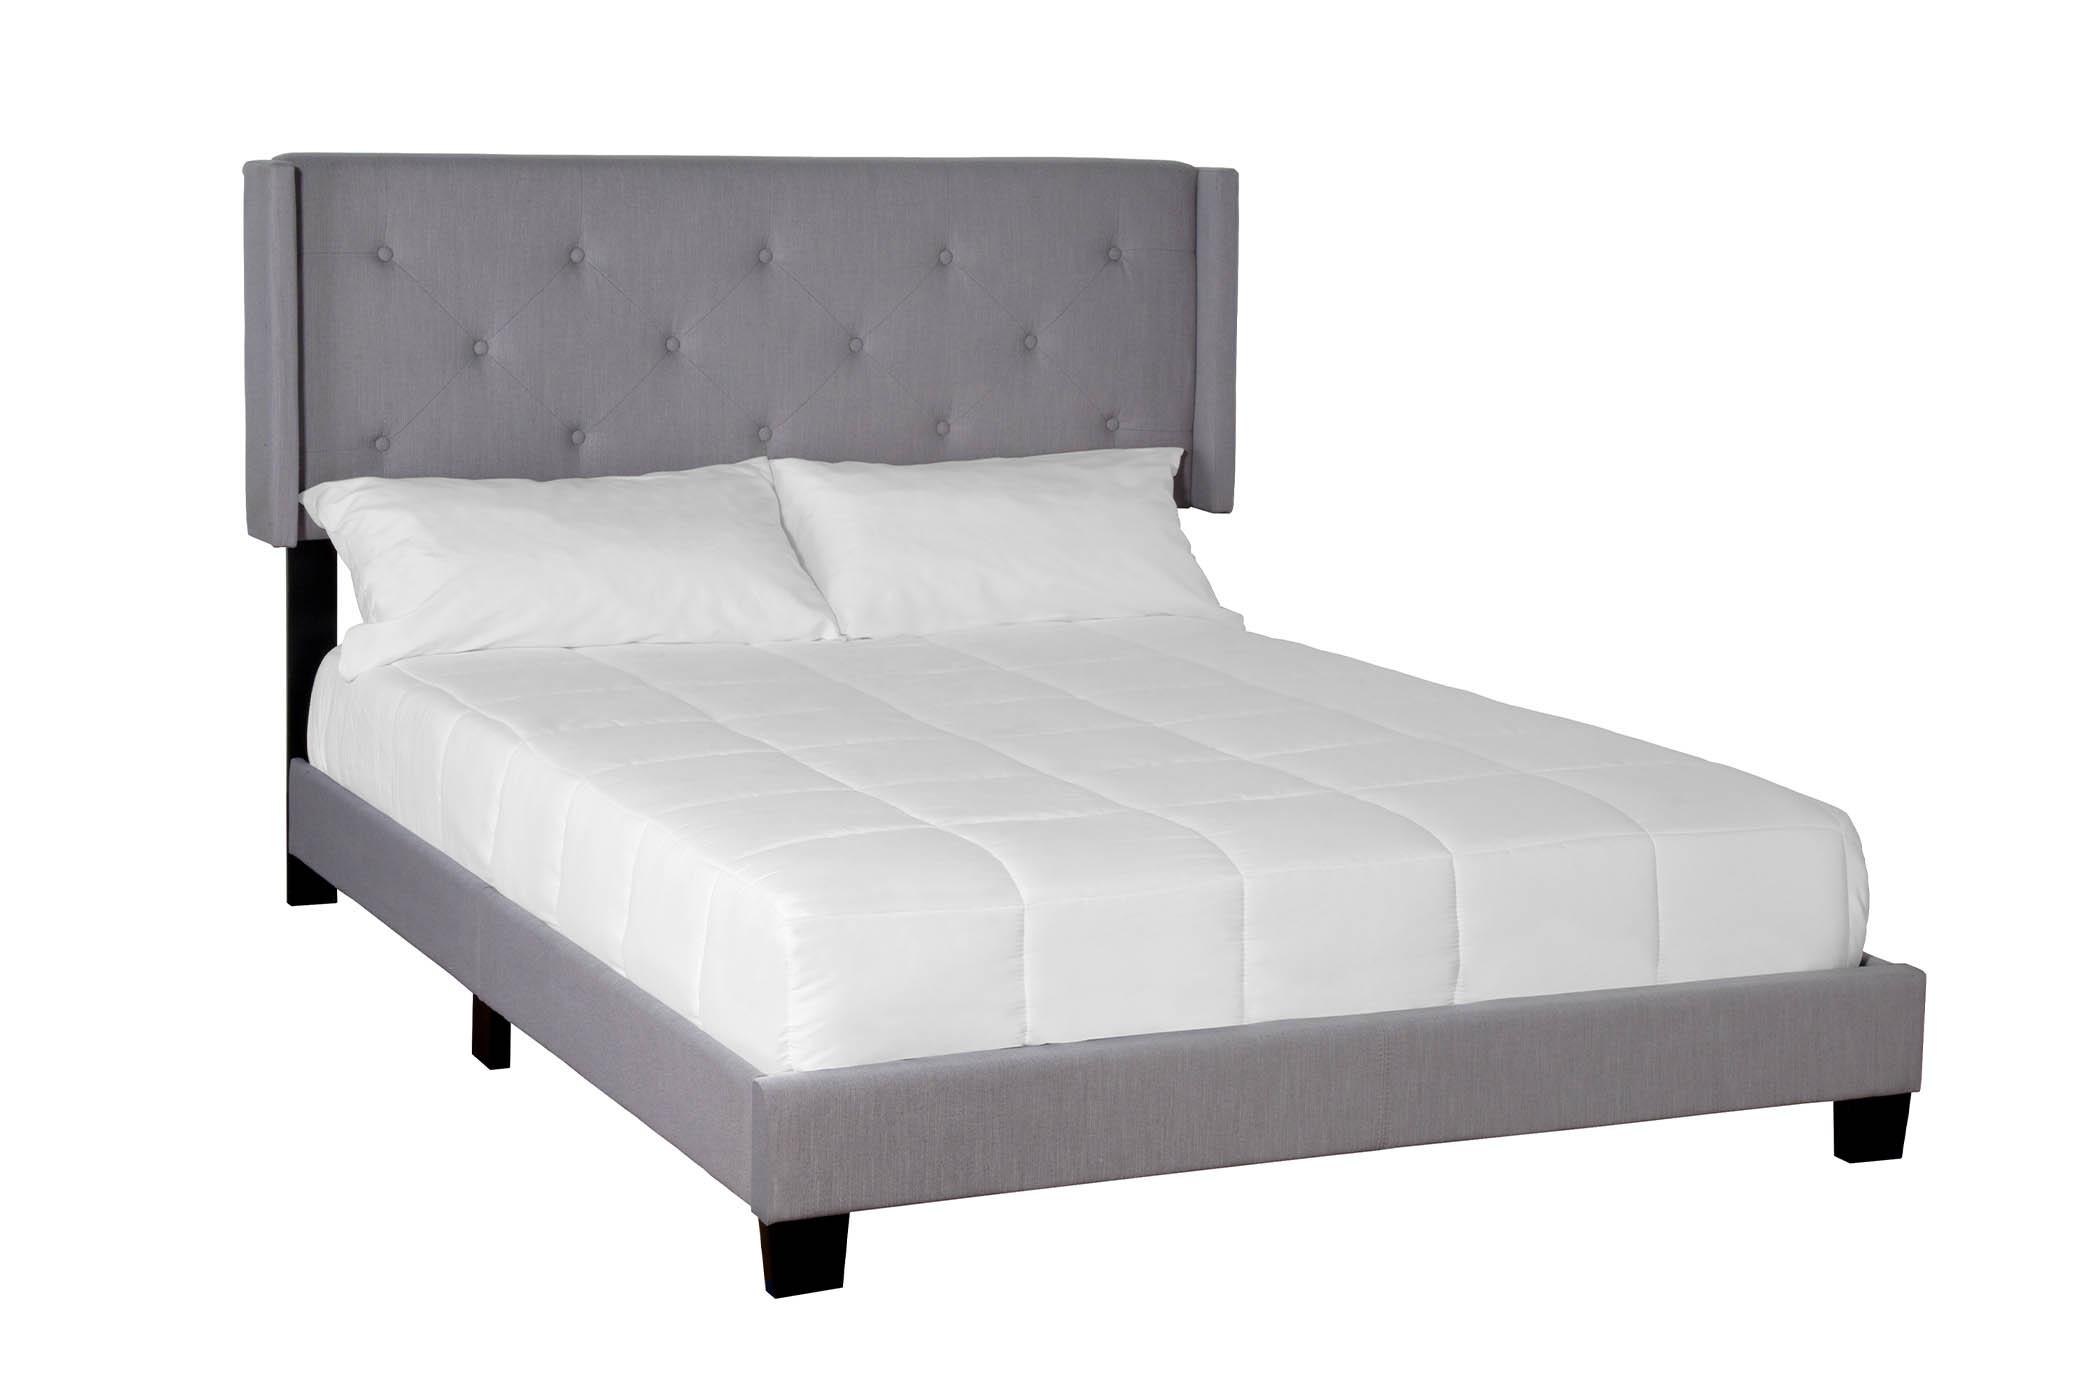 Modern, Transitional Panel Bed LYLA 1606DS-105 1606DS-105 in Gray Fabric